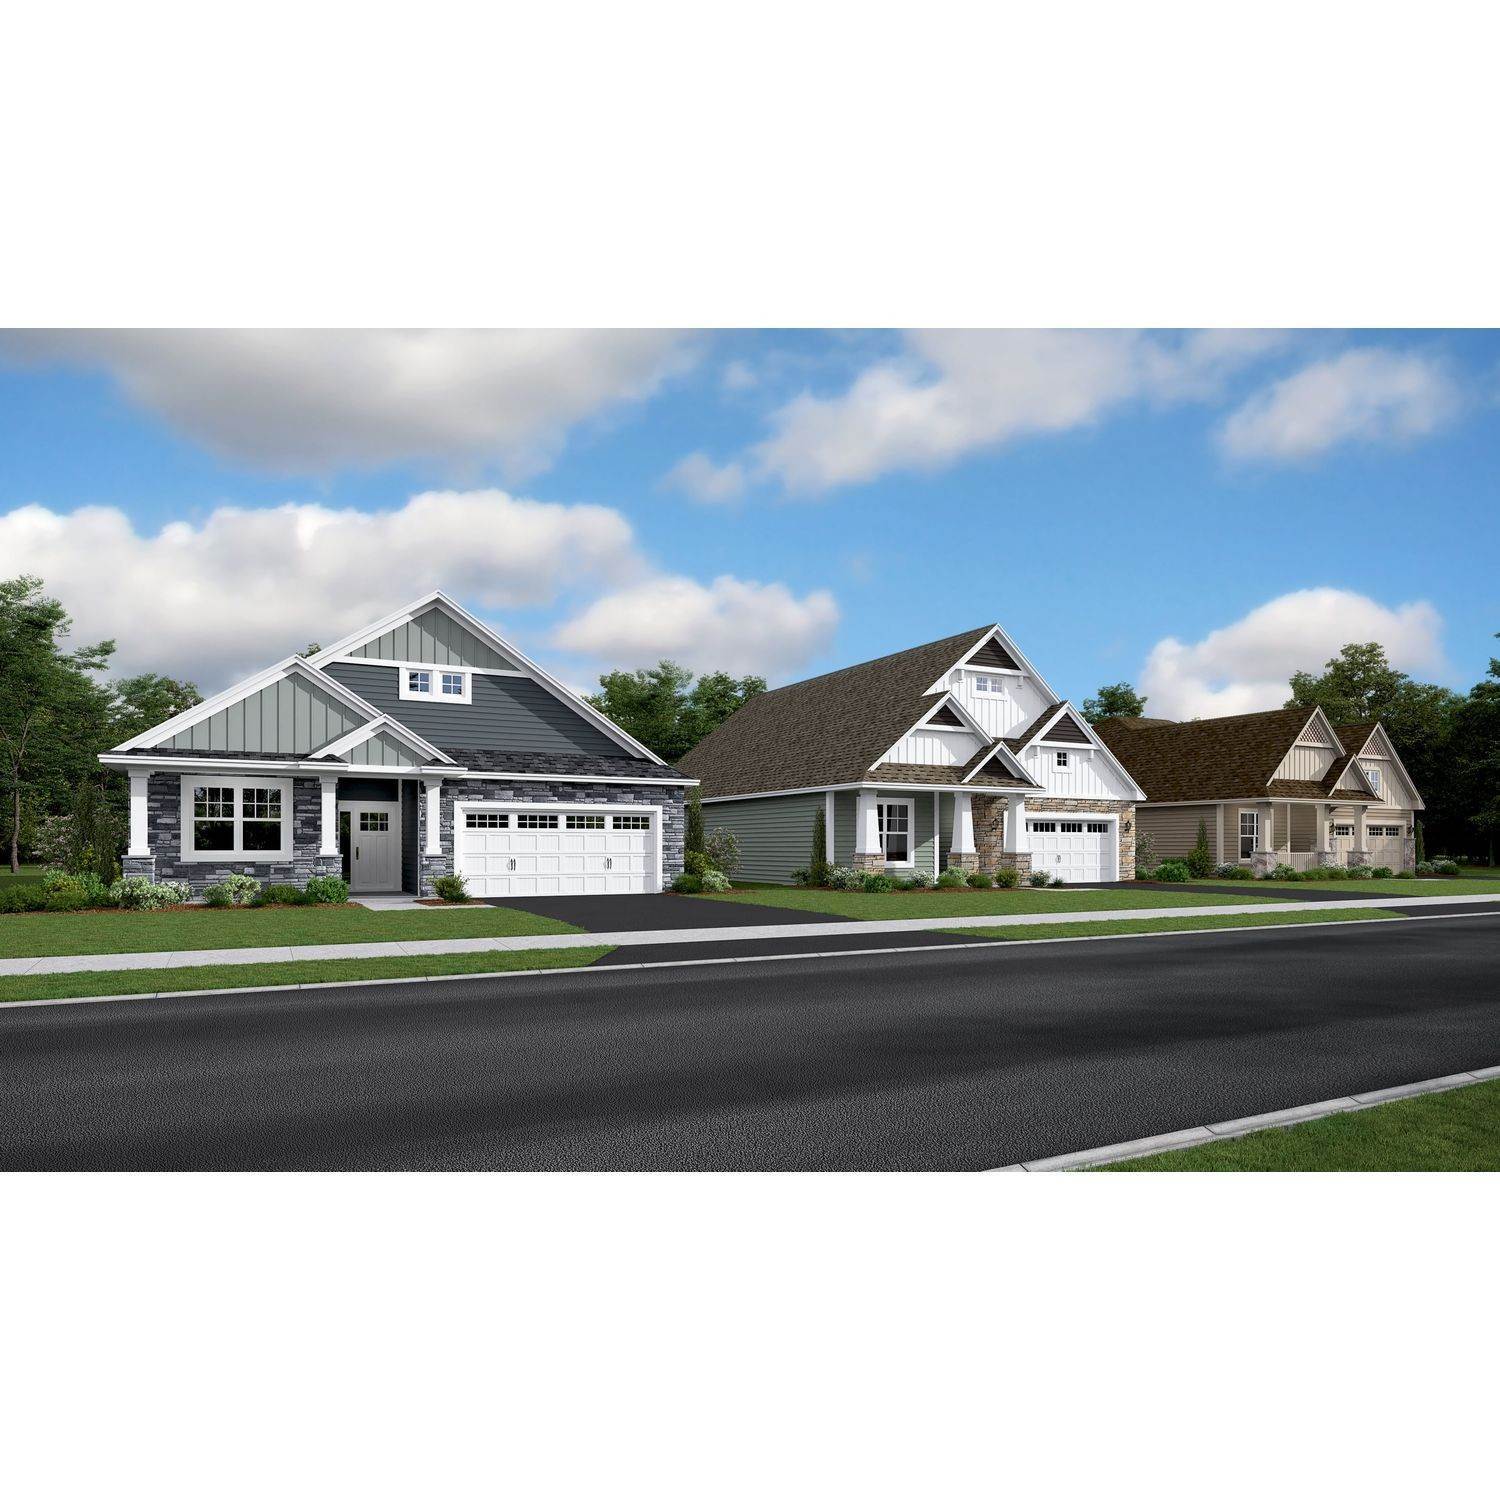 Fields of Winslow Cove - Lifestyle Villa Collection building at 722 151st Lane NW, Andover, MN 55304